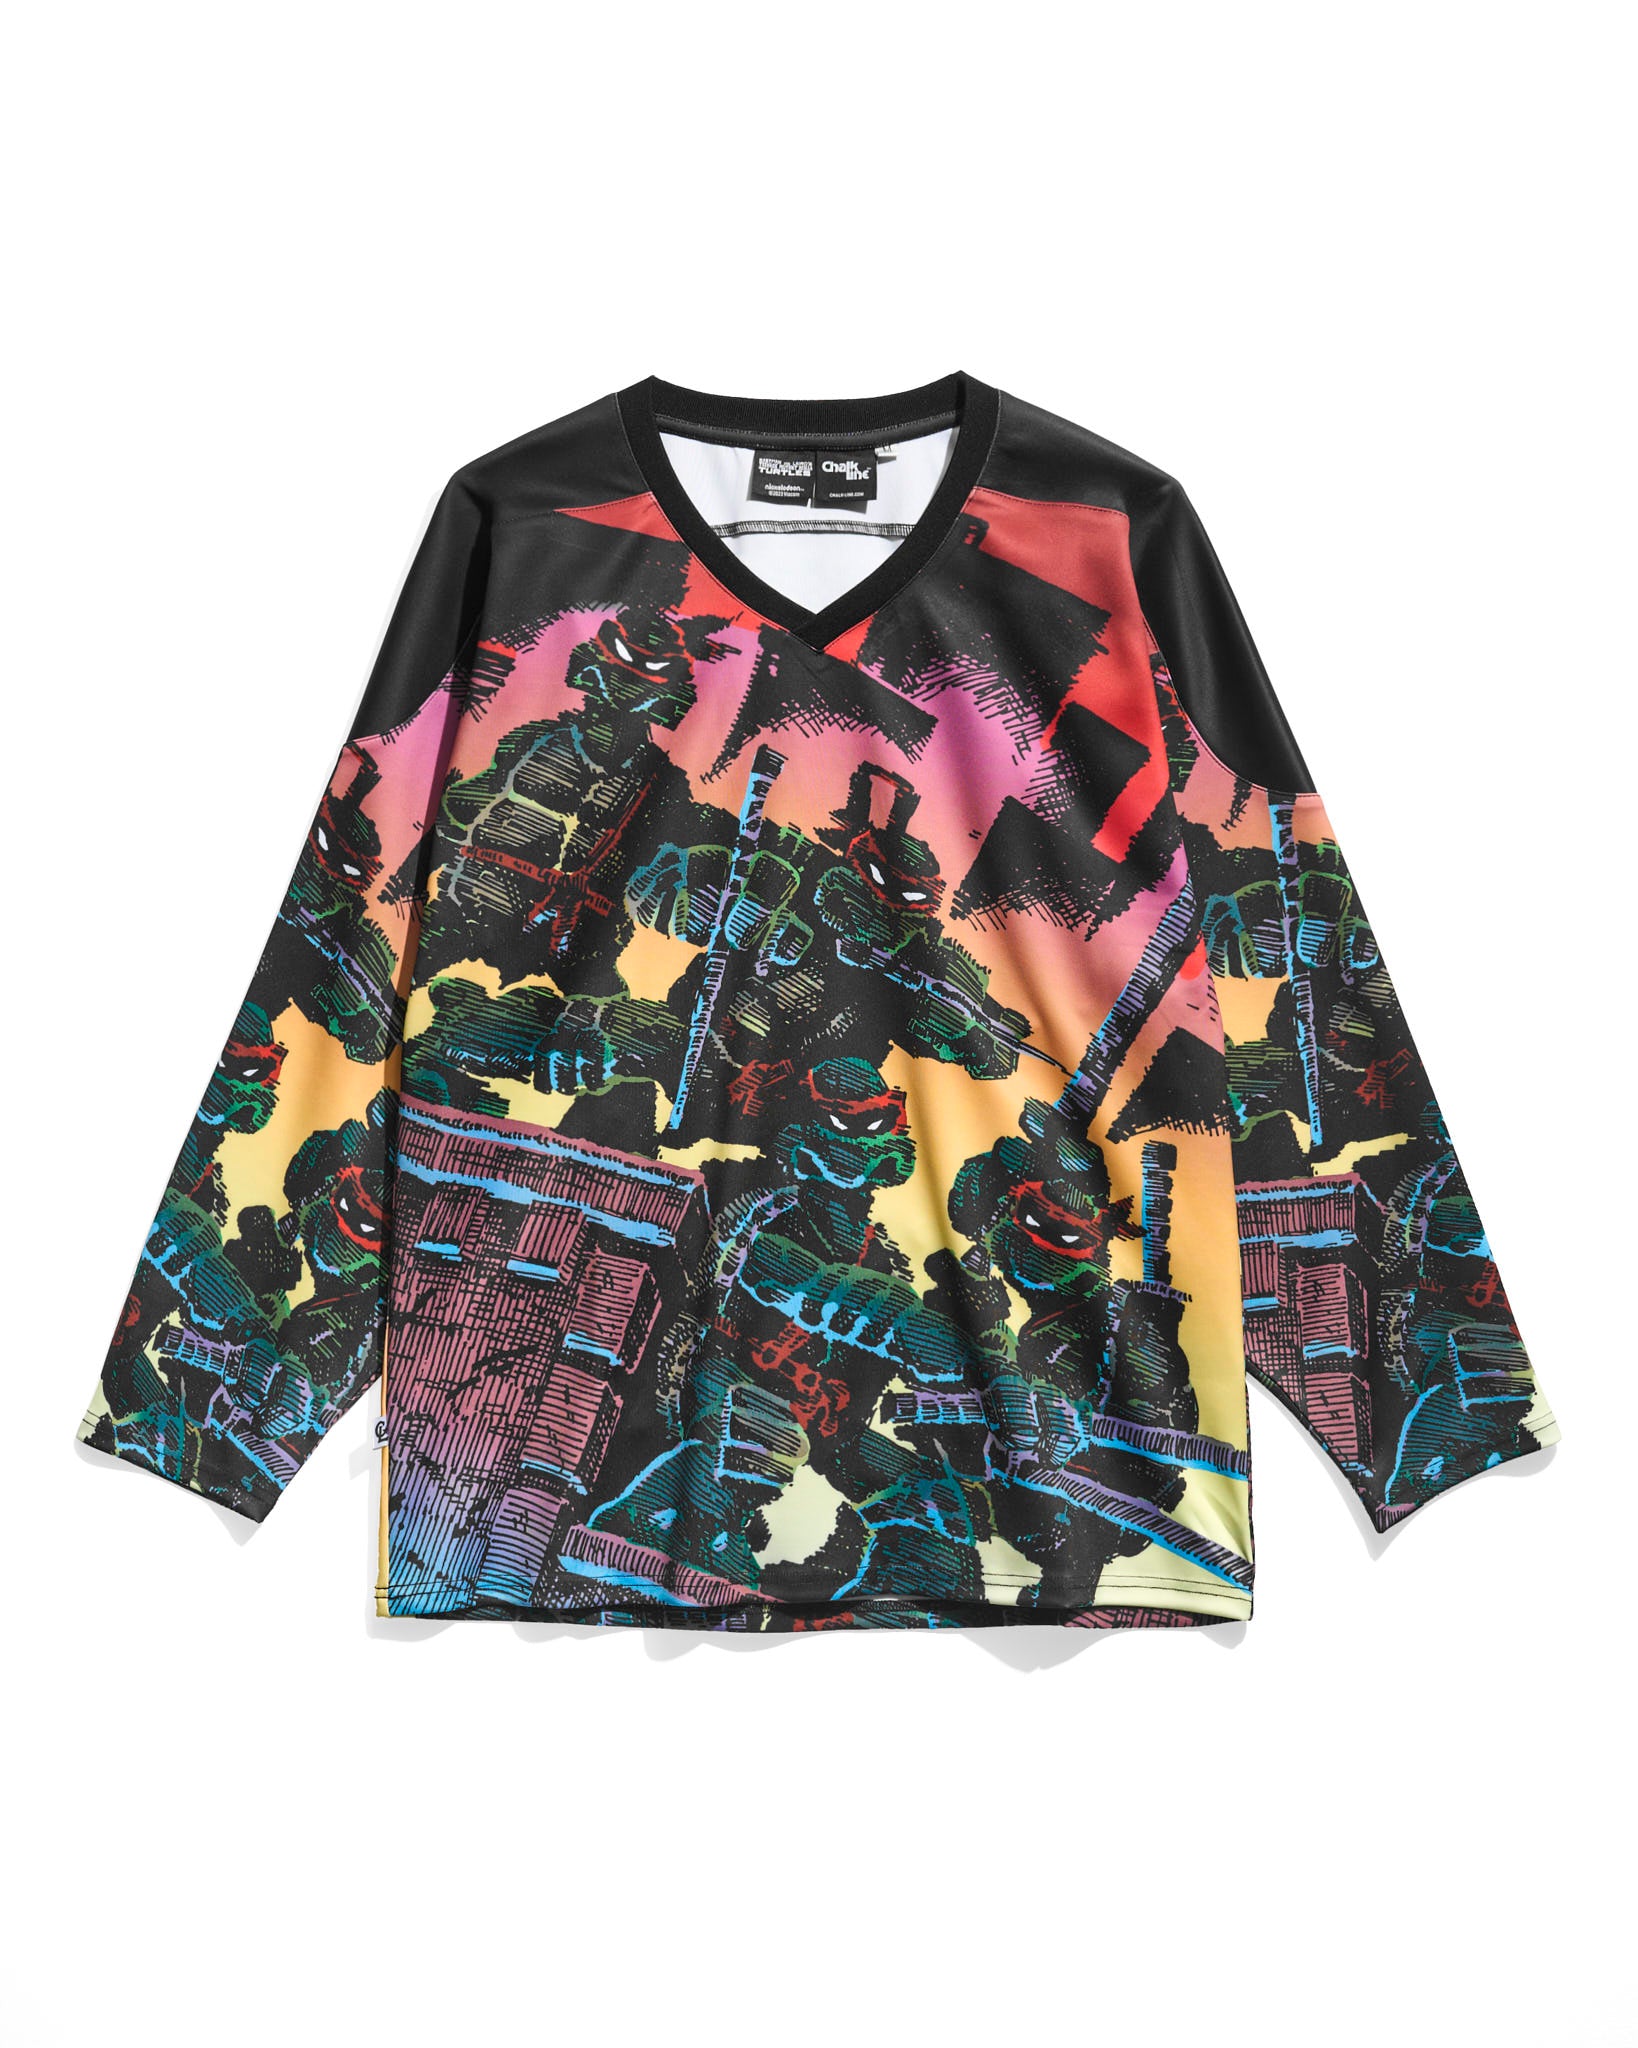 TMNT Eastman and Laird Cover 001 Hockey Jersey